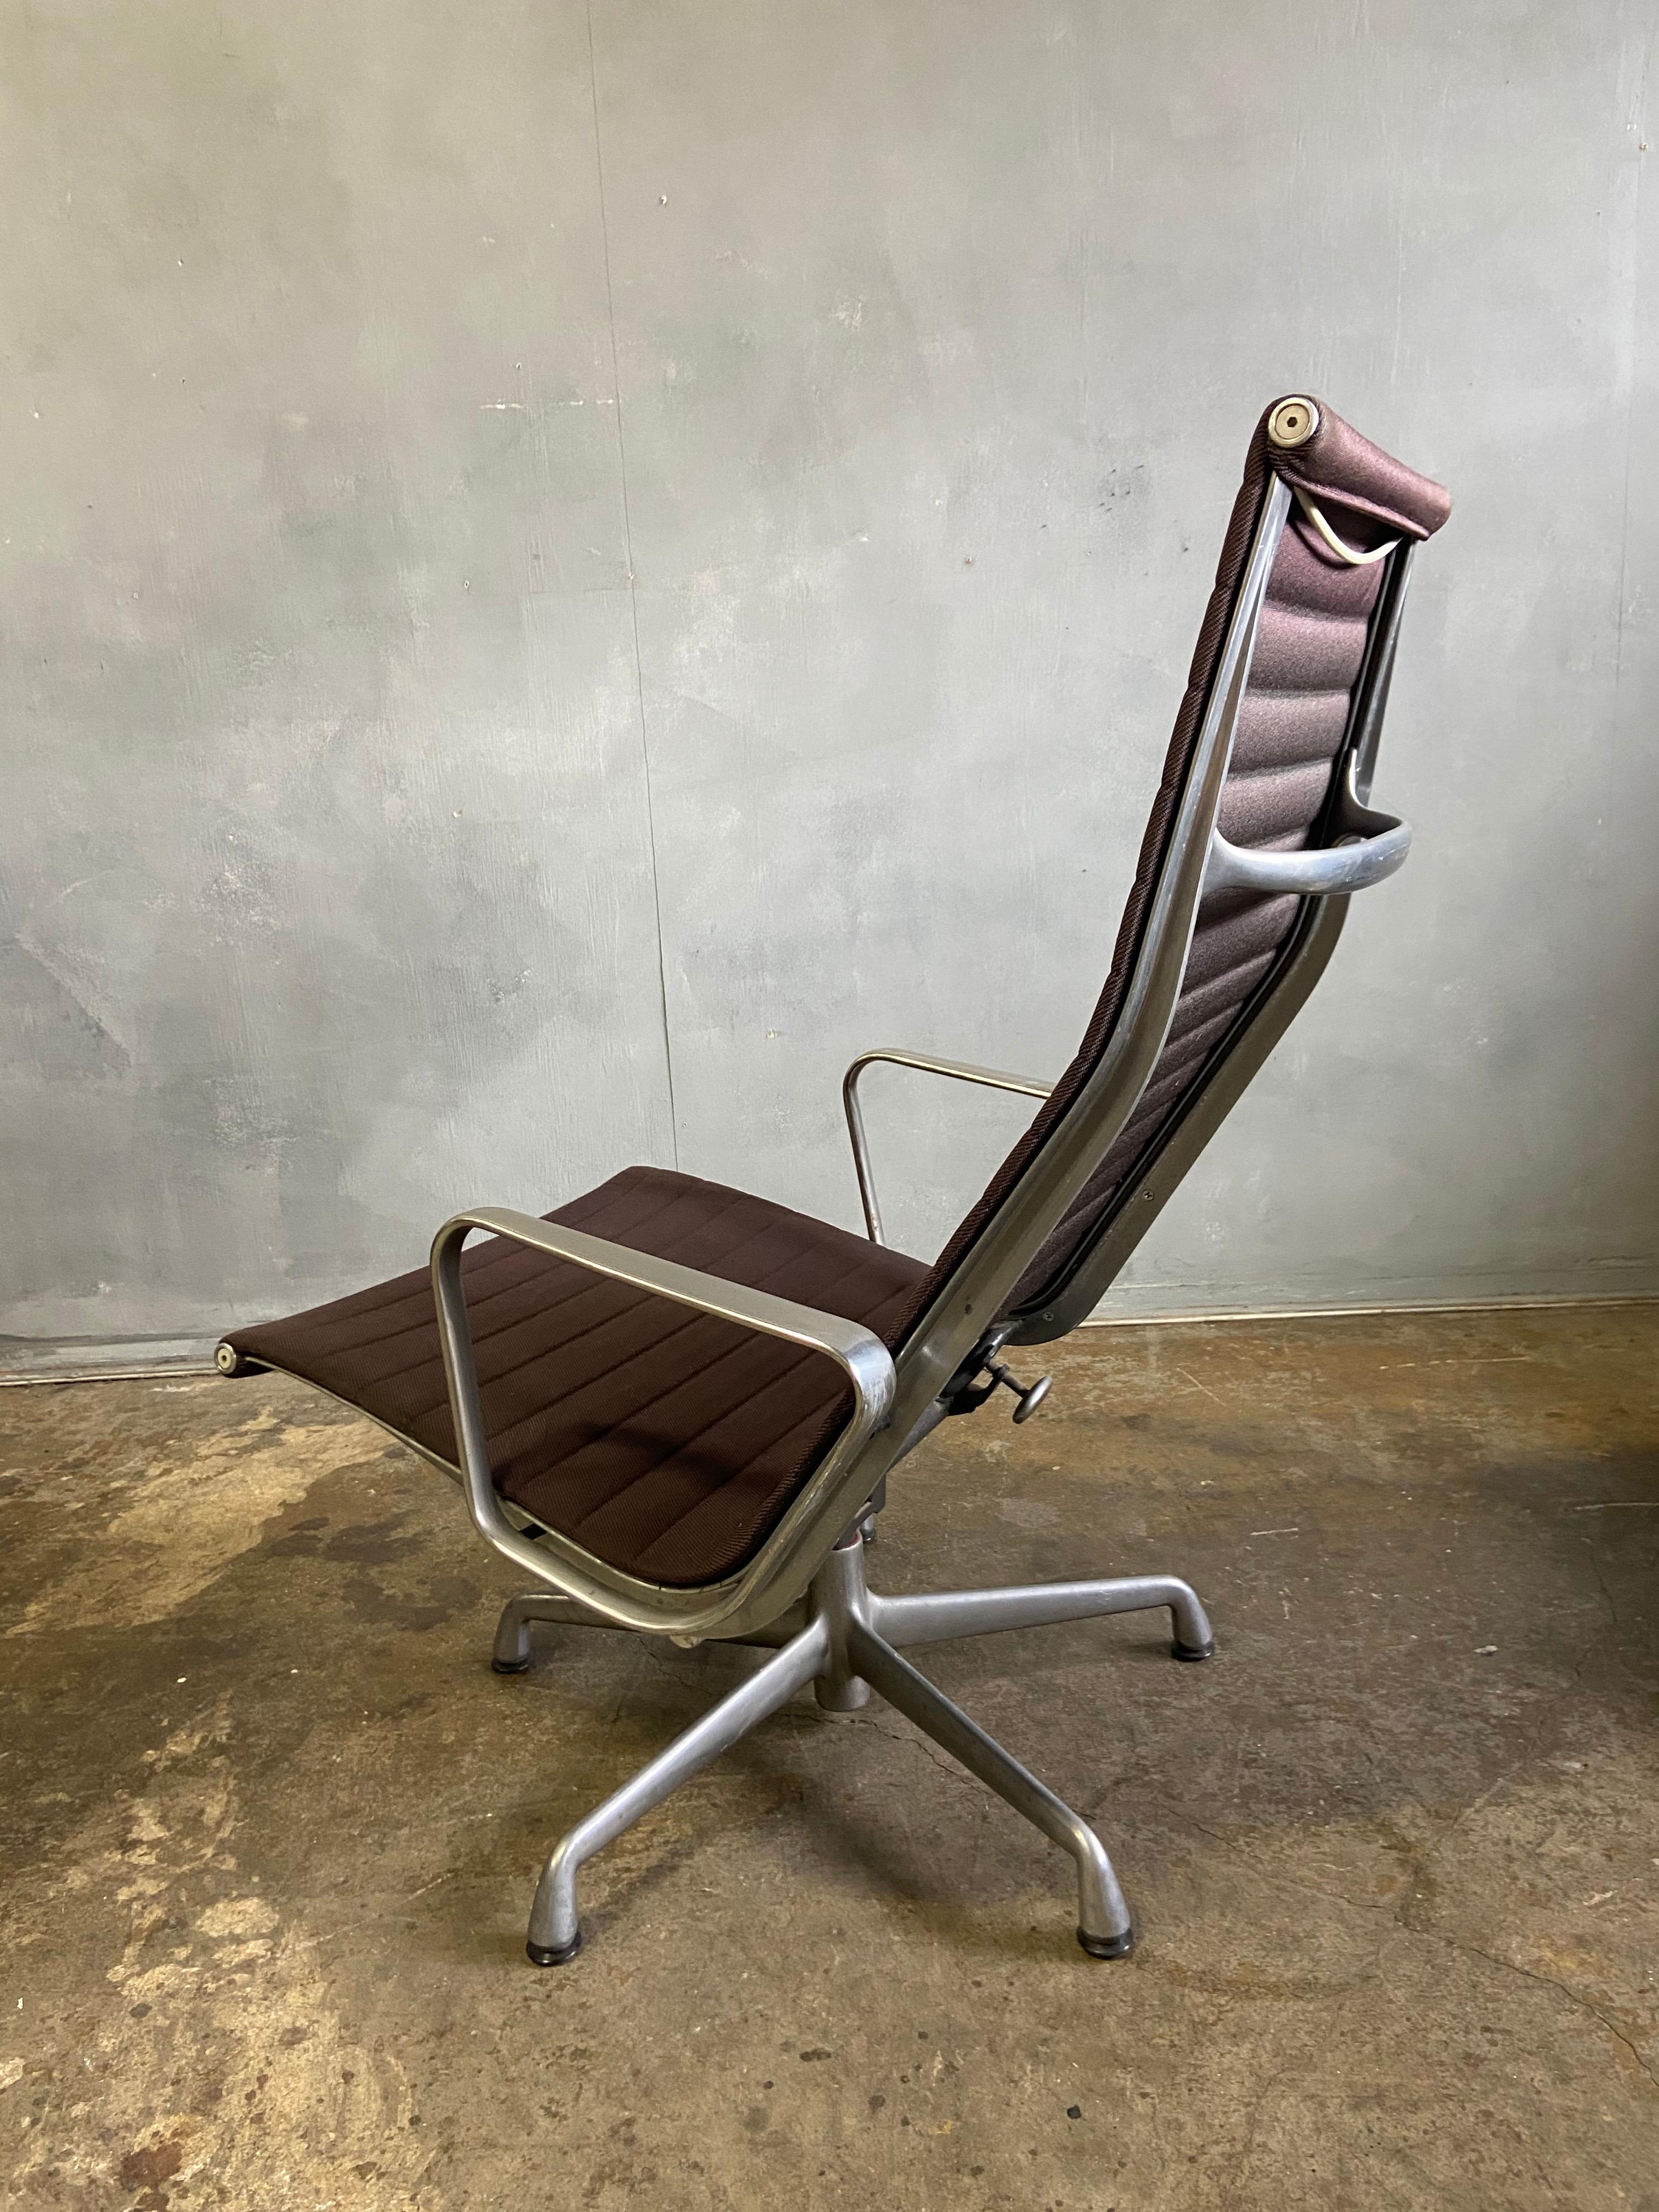 For your consideration is the original Midcentury Eames Aluminum Group lounge chair for Herman Miller. Featuring a plum fabric on aluminum frame with the removable headrest present. In wonderful vintage condition with no rips to the fabric. The